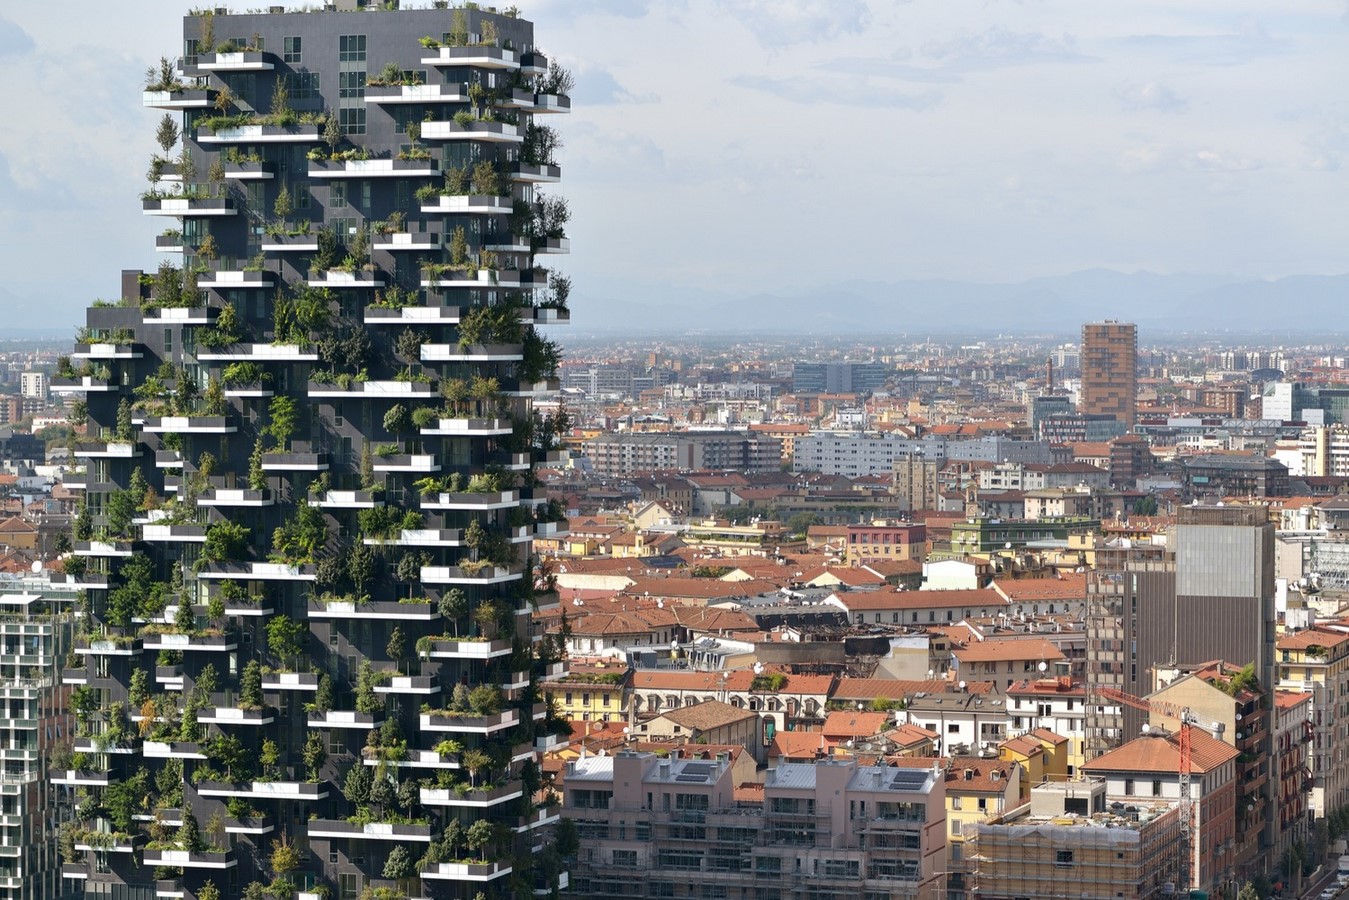 Architecture, Agriculture, and Aesthetics combined in Newly Unveiled Project by Stefano Boeri Architetti - Sheet1